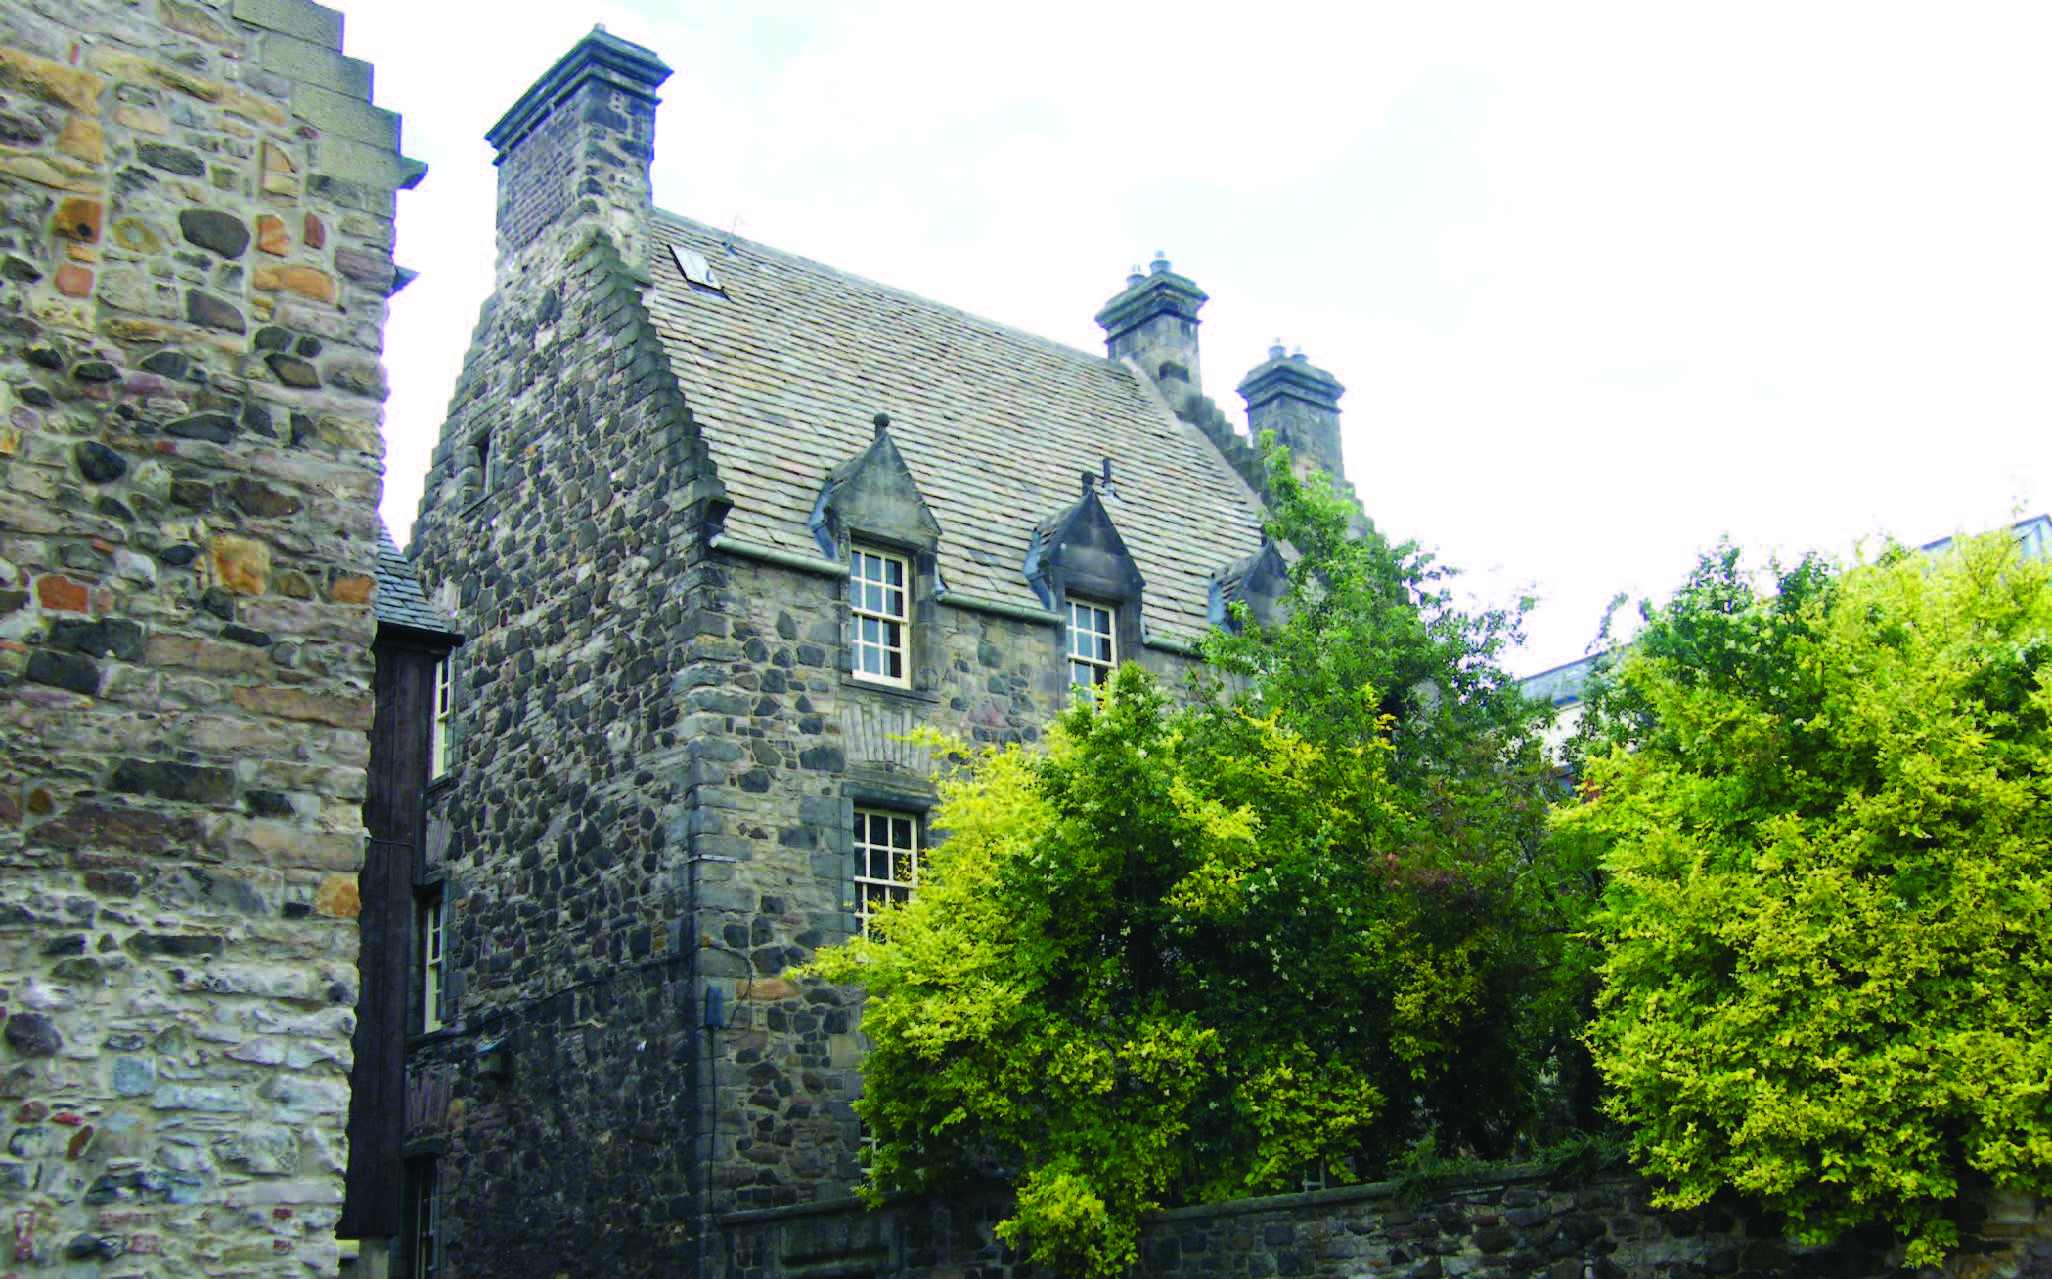 A heritage stone building and a courtyard with bright green trees. The roof of the building is made of slate.